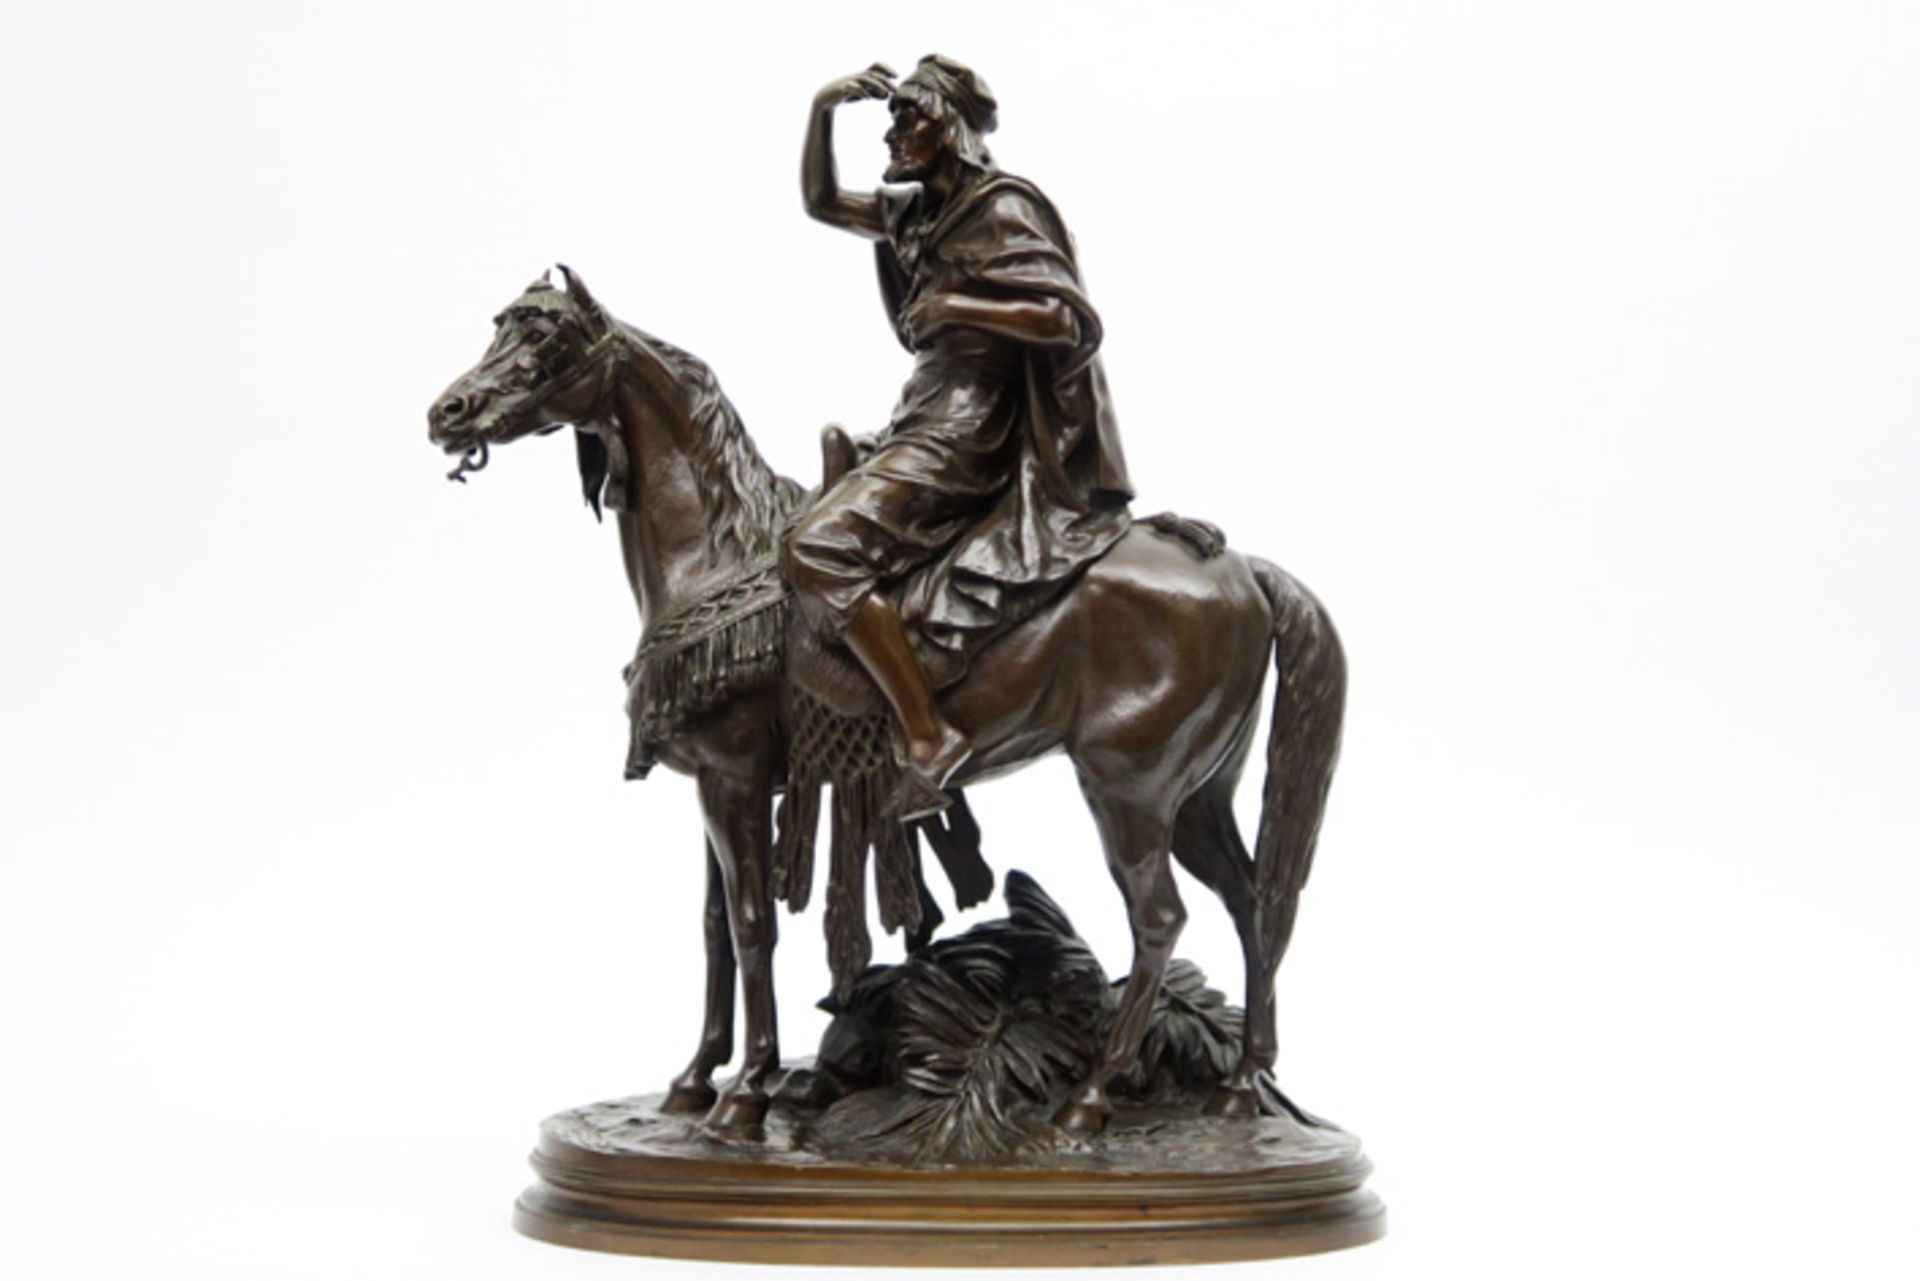 antique French orientalistic style "Arab on horse" sculpture in bronze - signed PAUTROT FERDINAND (